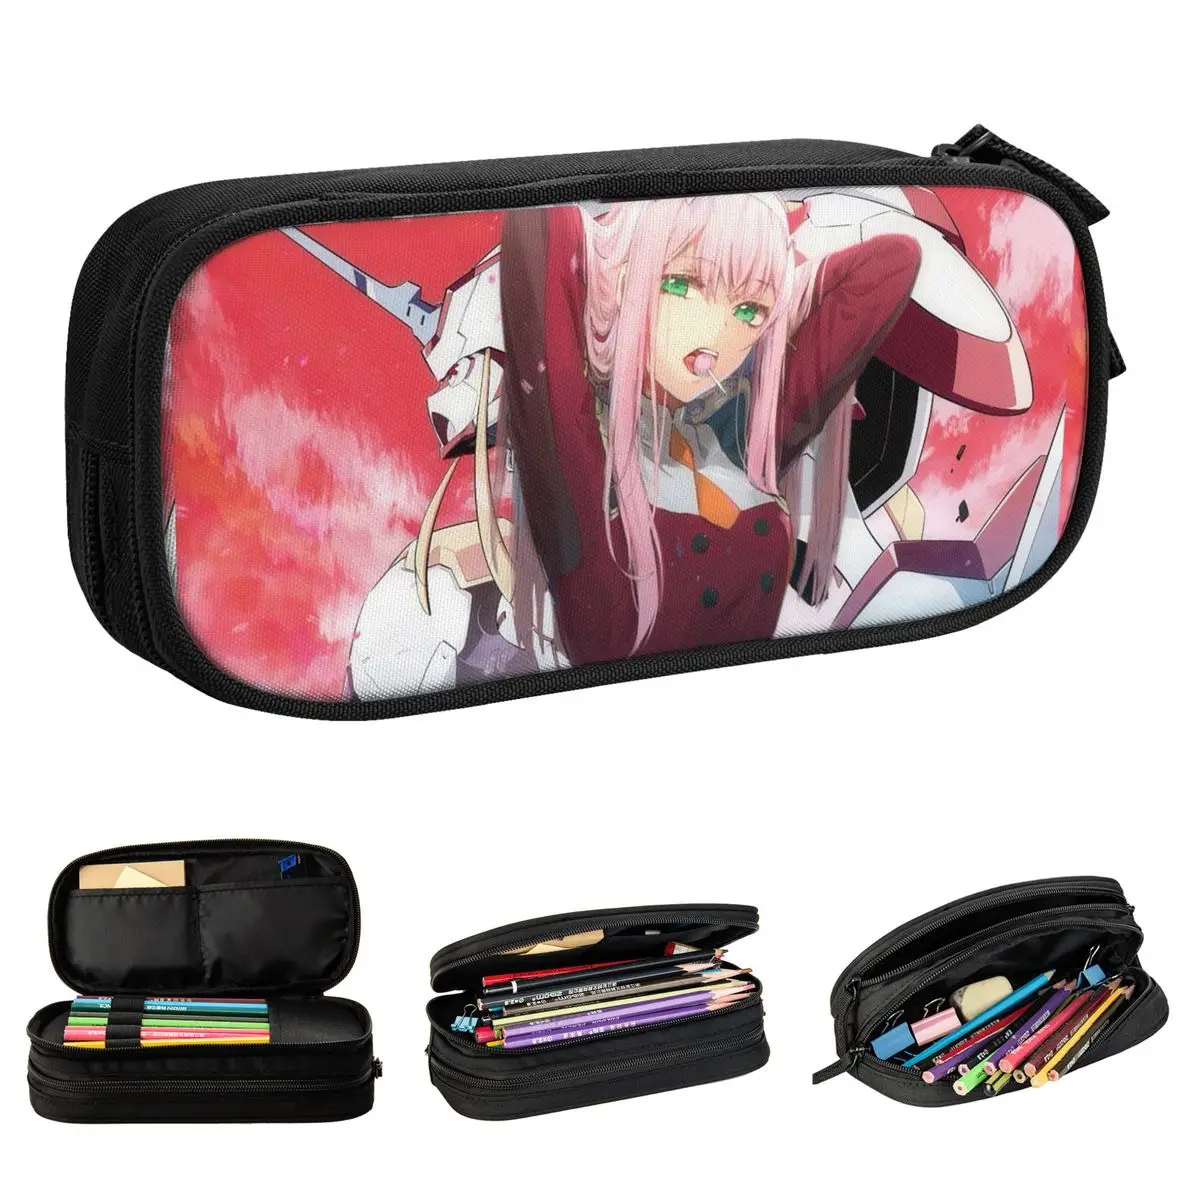 

Darling In The Franxx Kiss Of Death Pencil Cases Anime Sweet Girl Zero Two Pen Holder Bags Student Students School Pencilcases